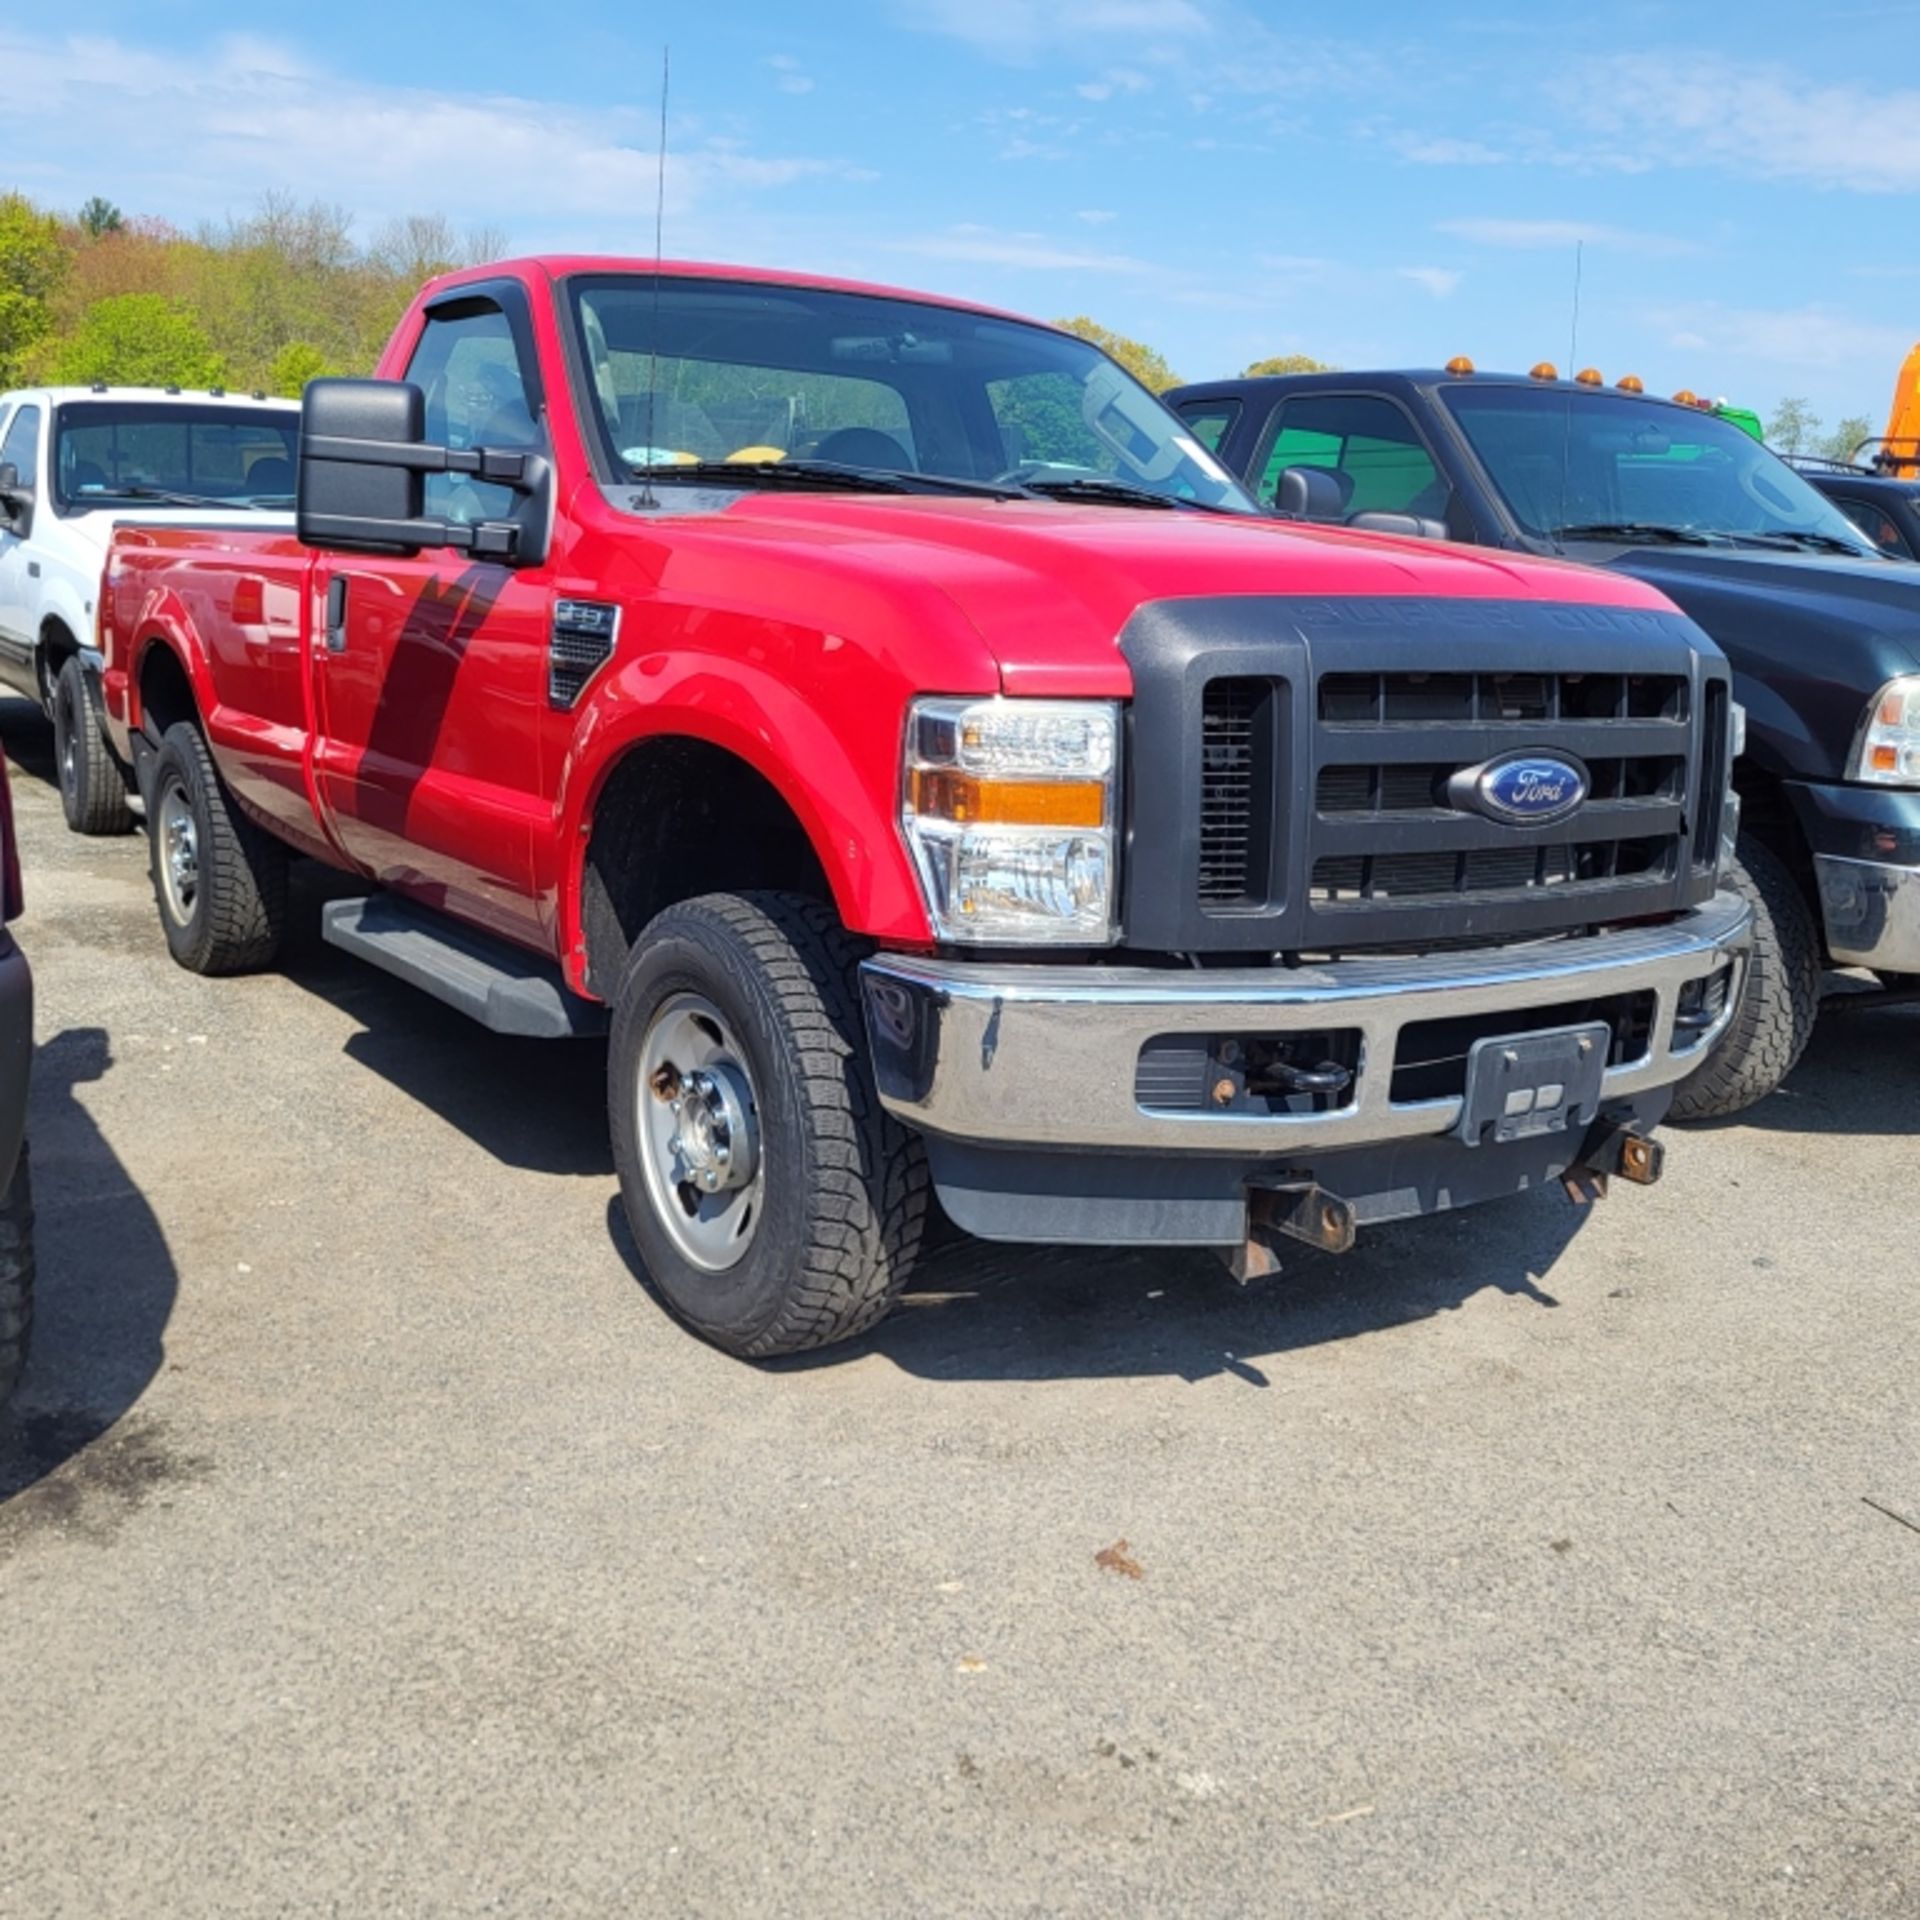 2010 Ford F-250 Pickup W/plow - Image 12 of 18